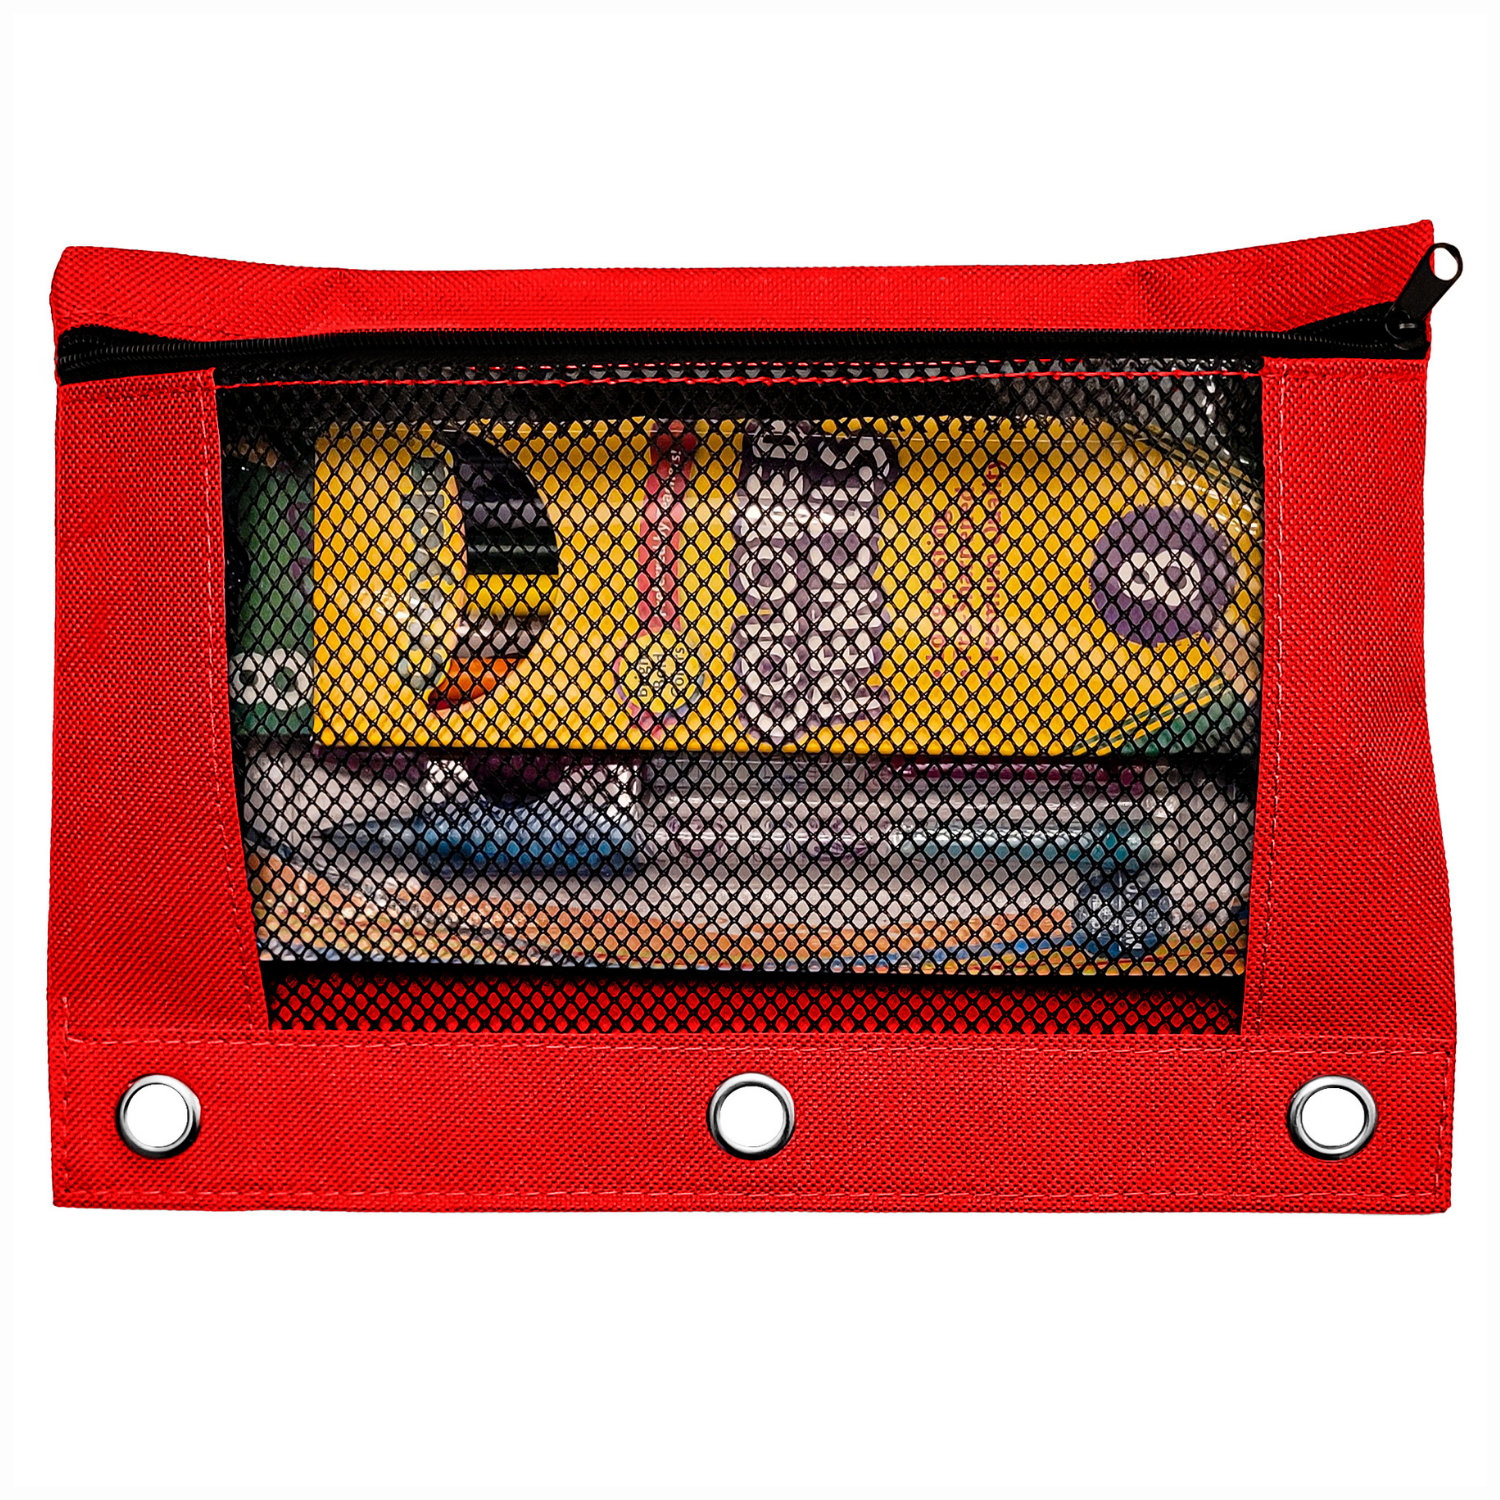 Schoolio Red Pencil Case for Kids Zipper Pencil Pouch for 3 Ring Binder, Size: 10 x 7